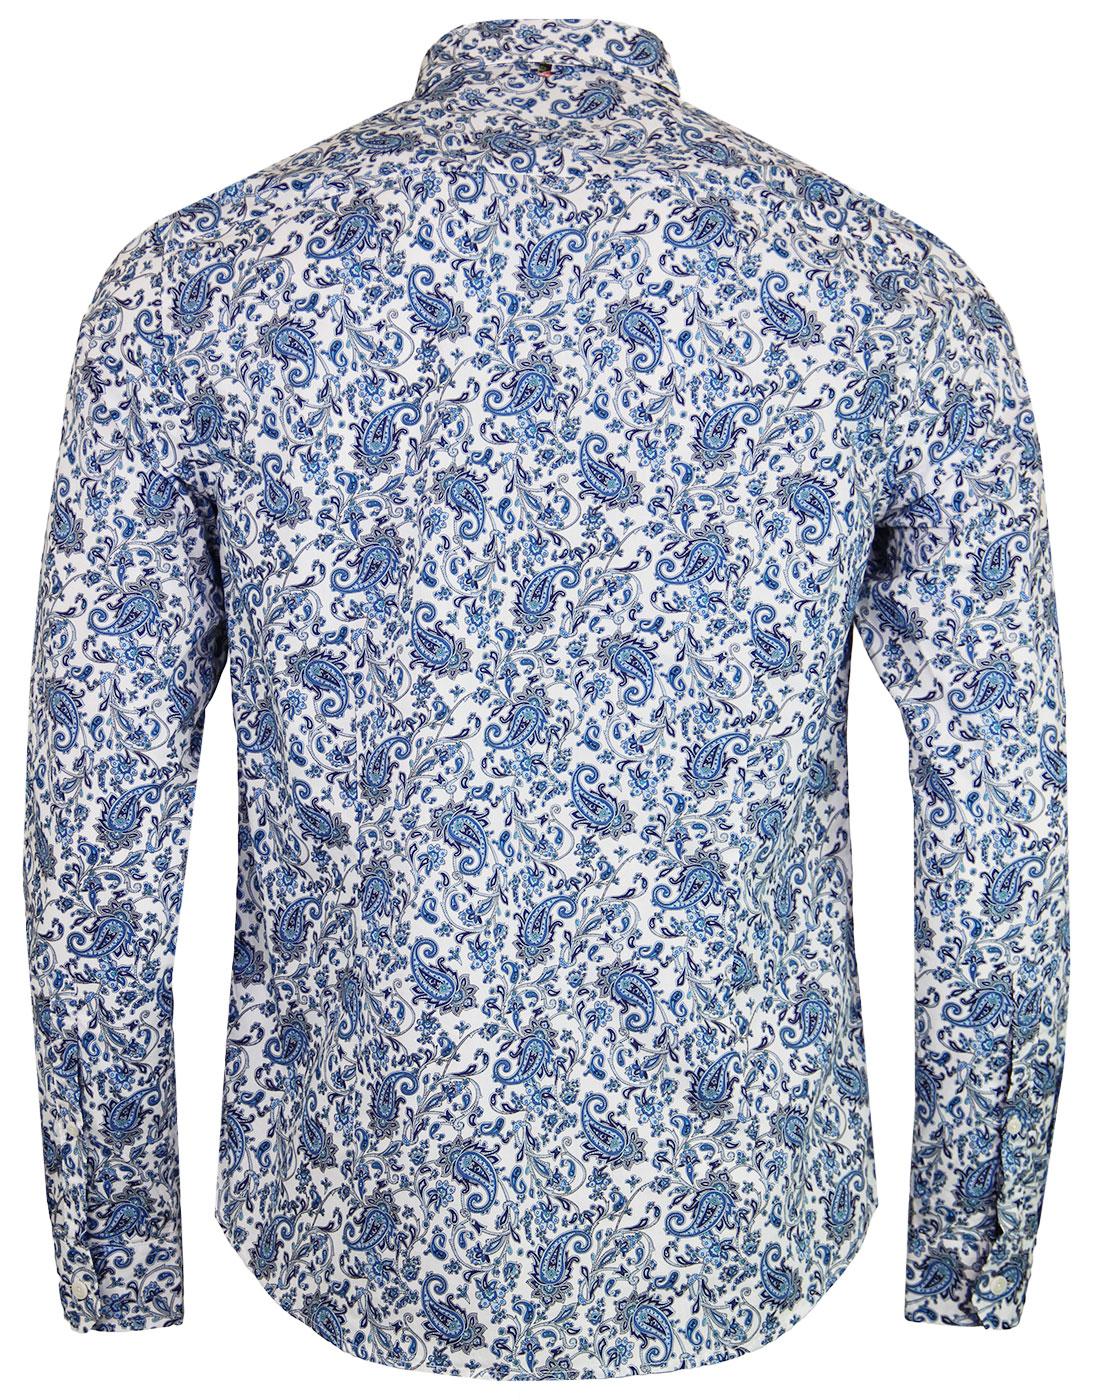 PRETTY GREEN Offshore 60s Mod Ditsy Floral Paisley Shirt in White